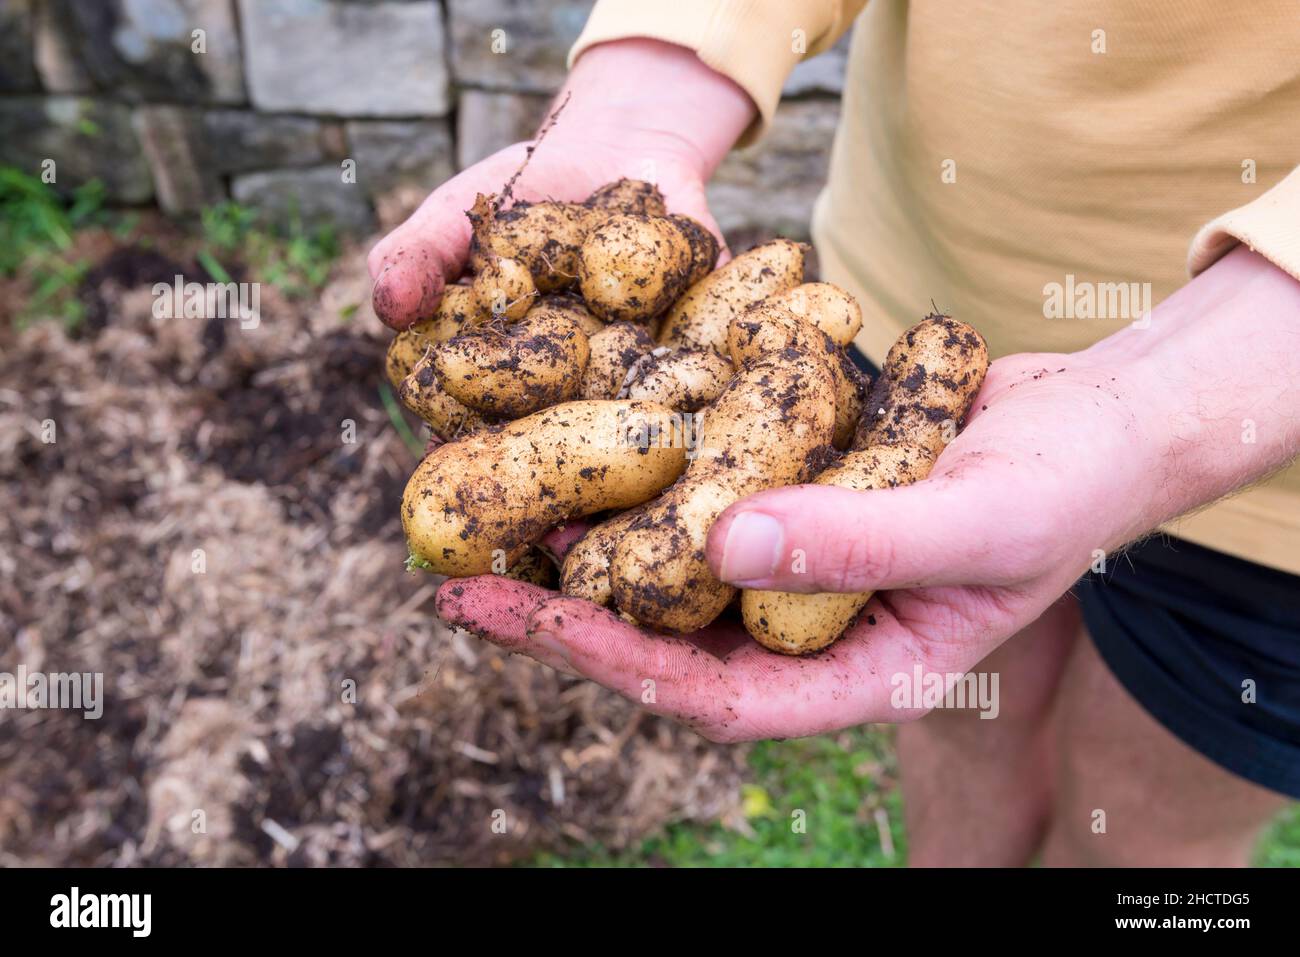 A young man holding in his hands, freshly harvested and dug up Russian Banana fingerling potatoes (Solanum tuberosum) home grown in Sydney, Australia Stock Photo